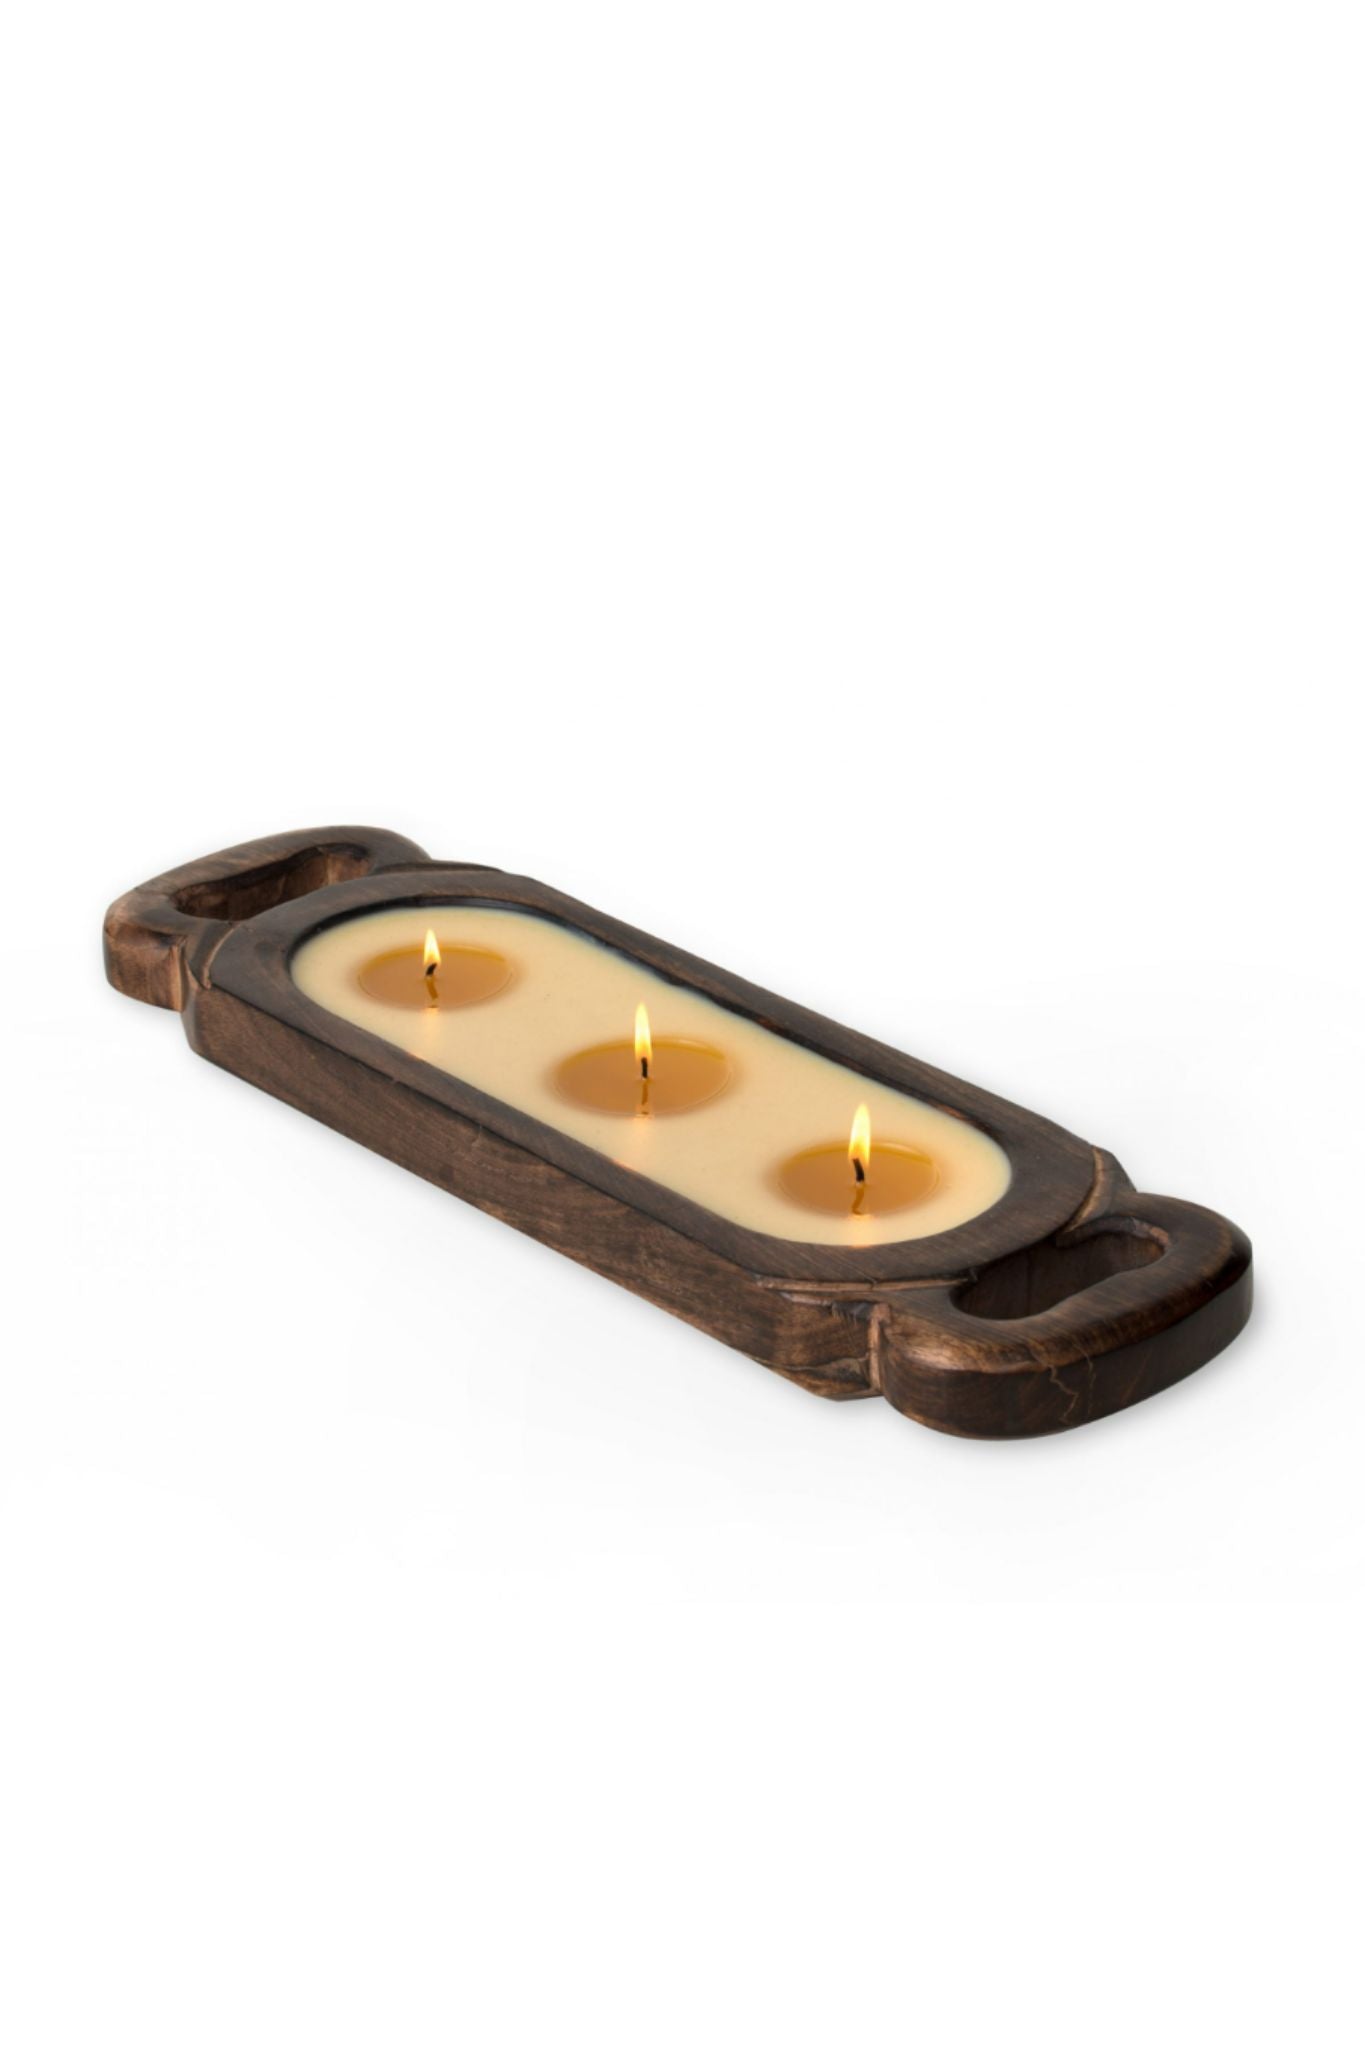 Small Wood Candle Tray (Grapefruit Pine)